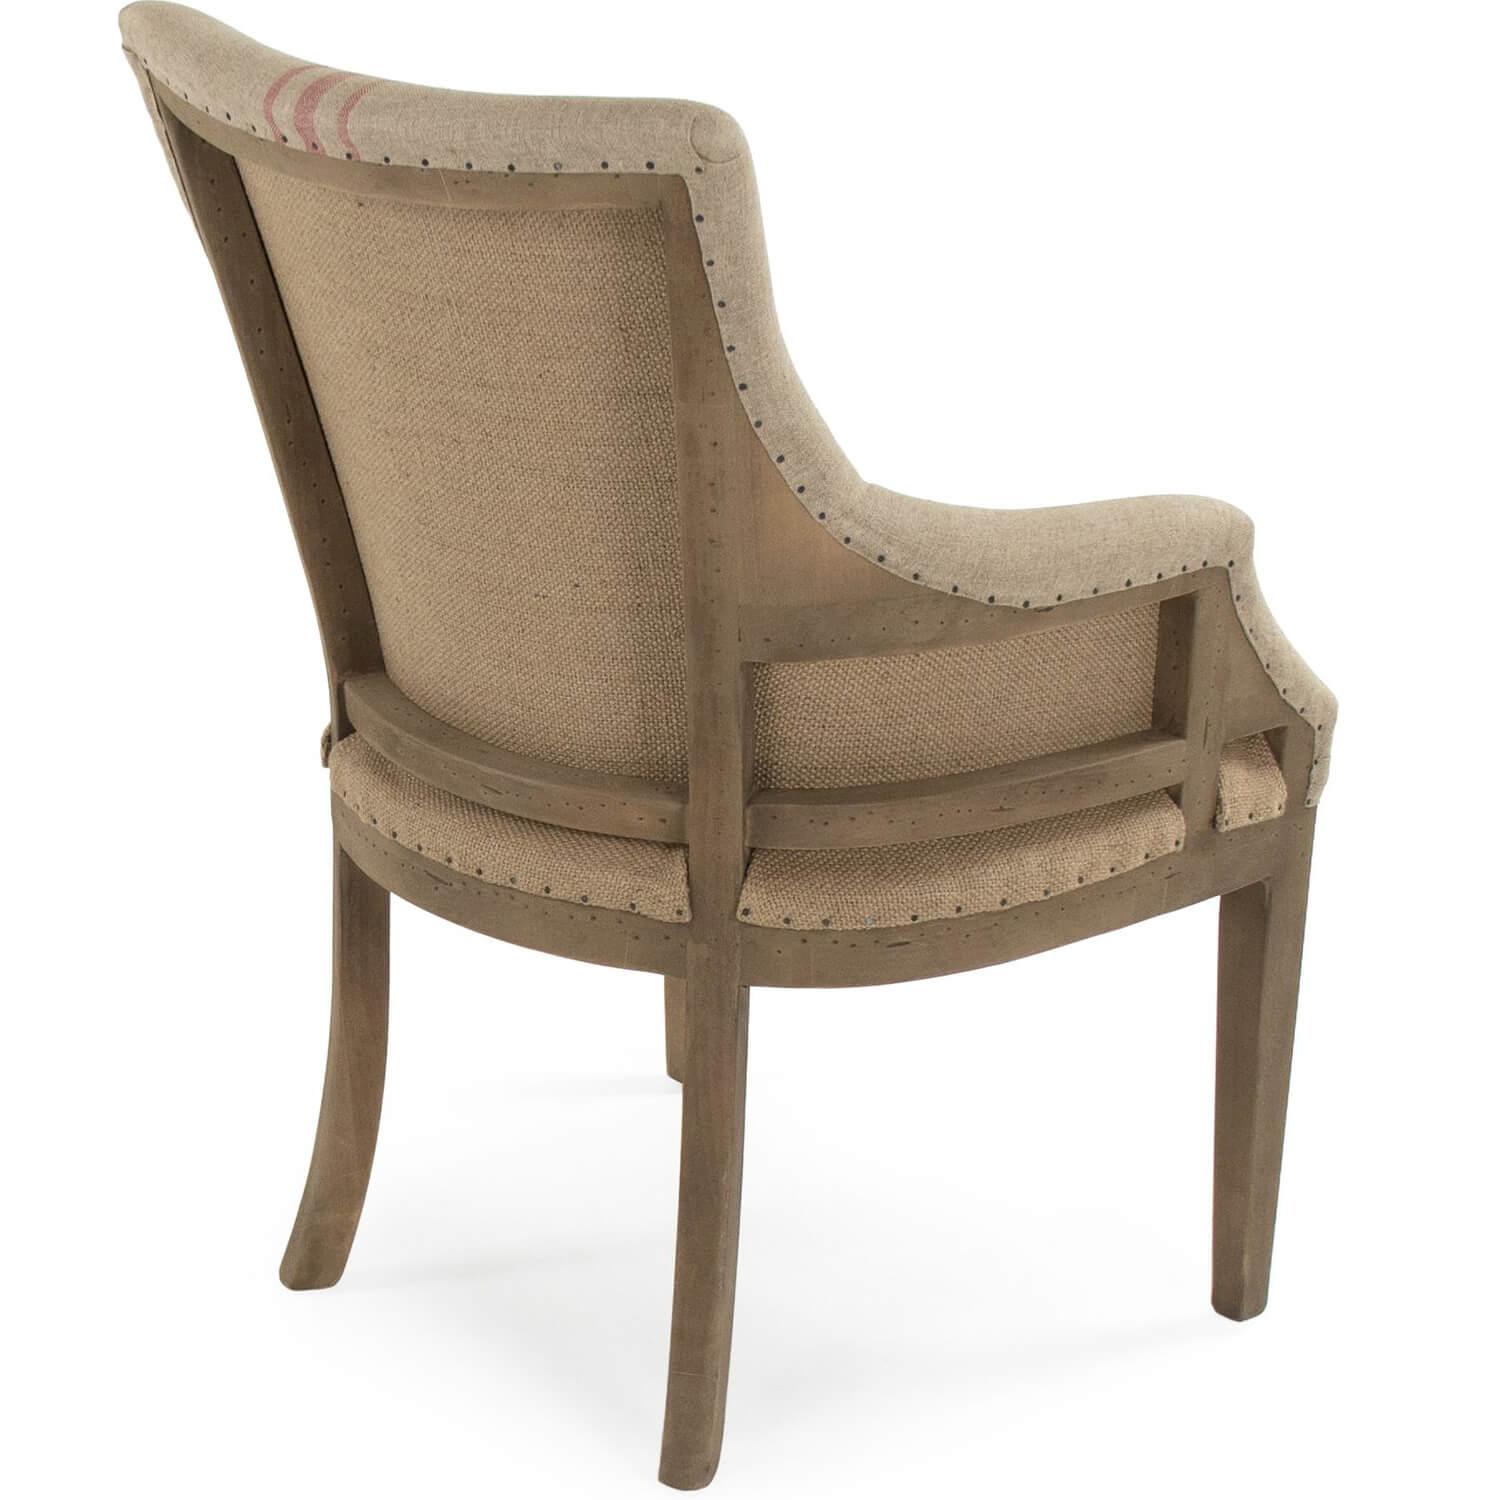 Red Striped Deconstructed Arm Chair - Belle Escape